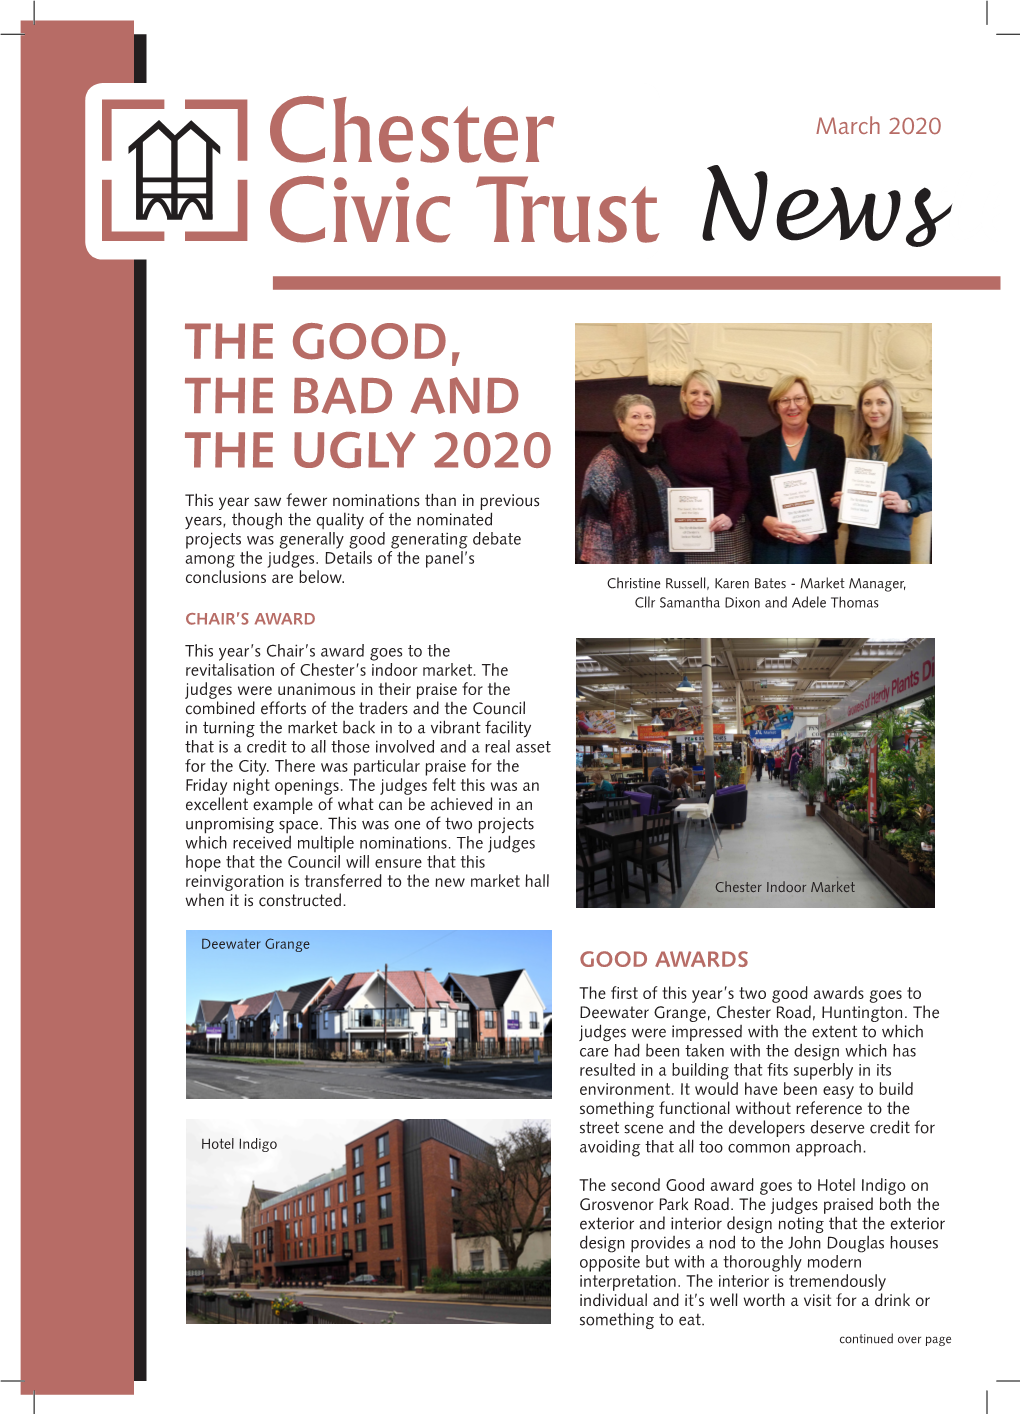 Civic Newsletter March 2020